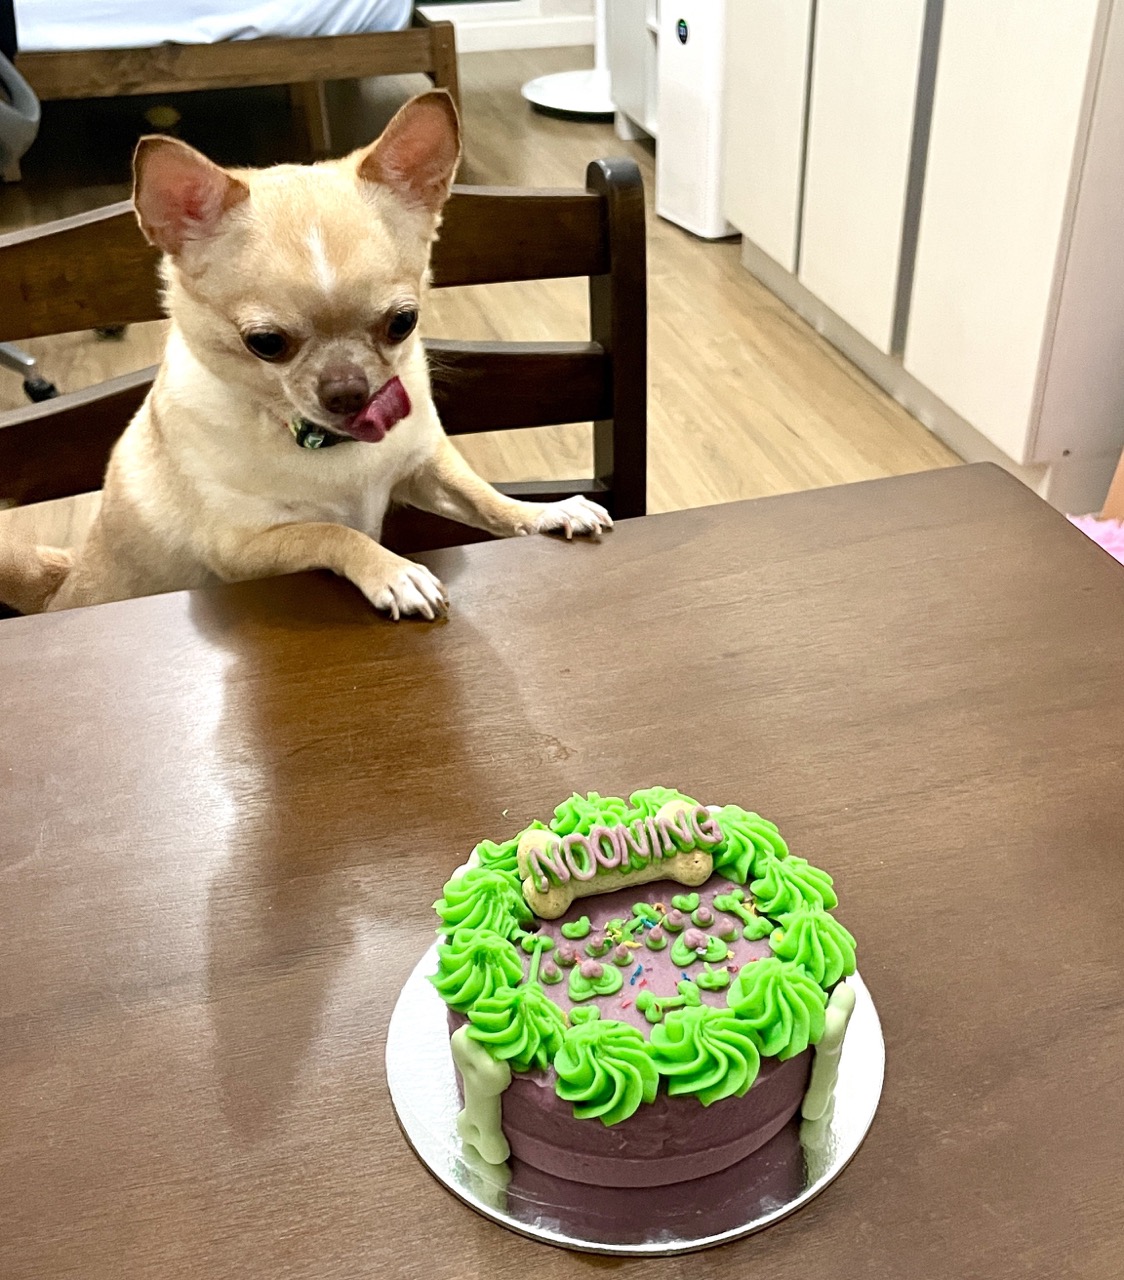 Fawn Chihuahua focused on the cake